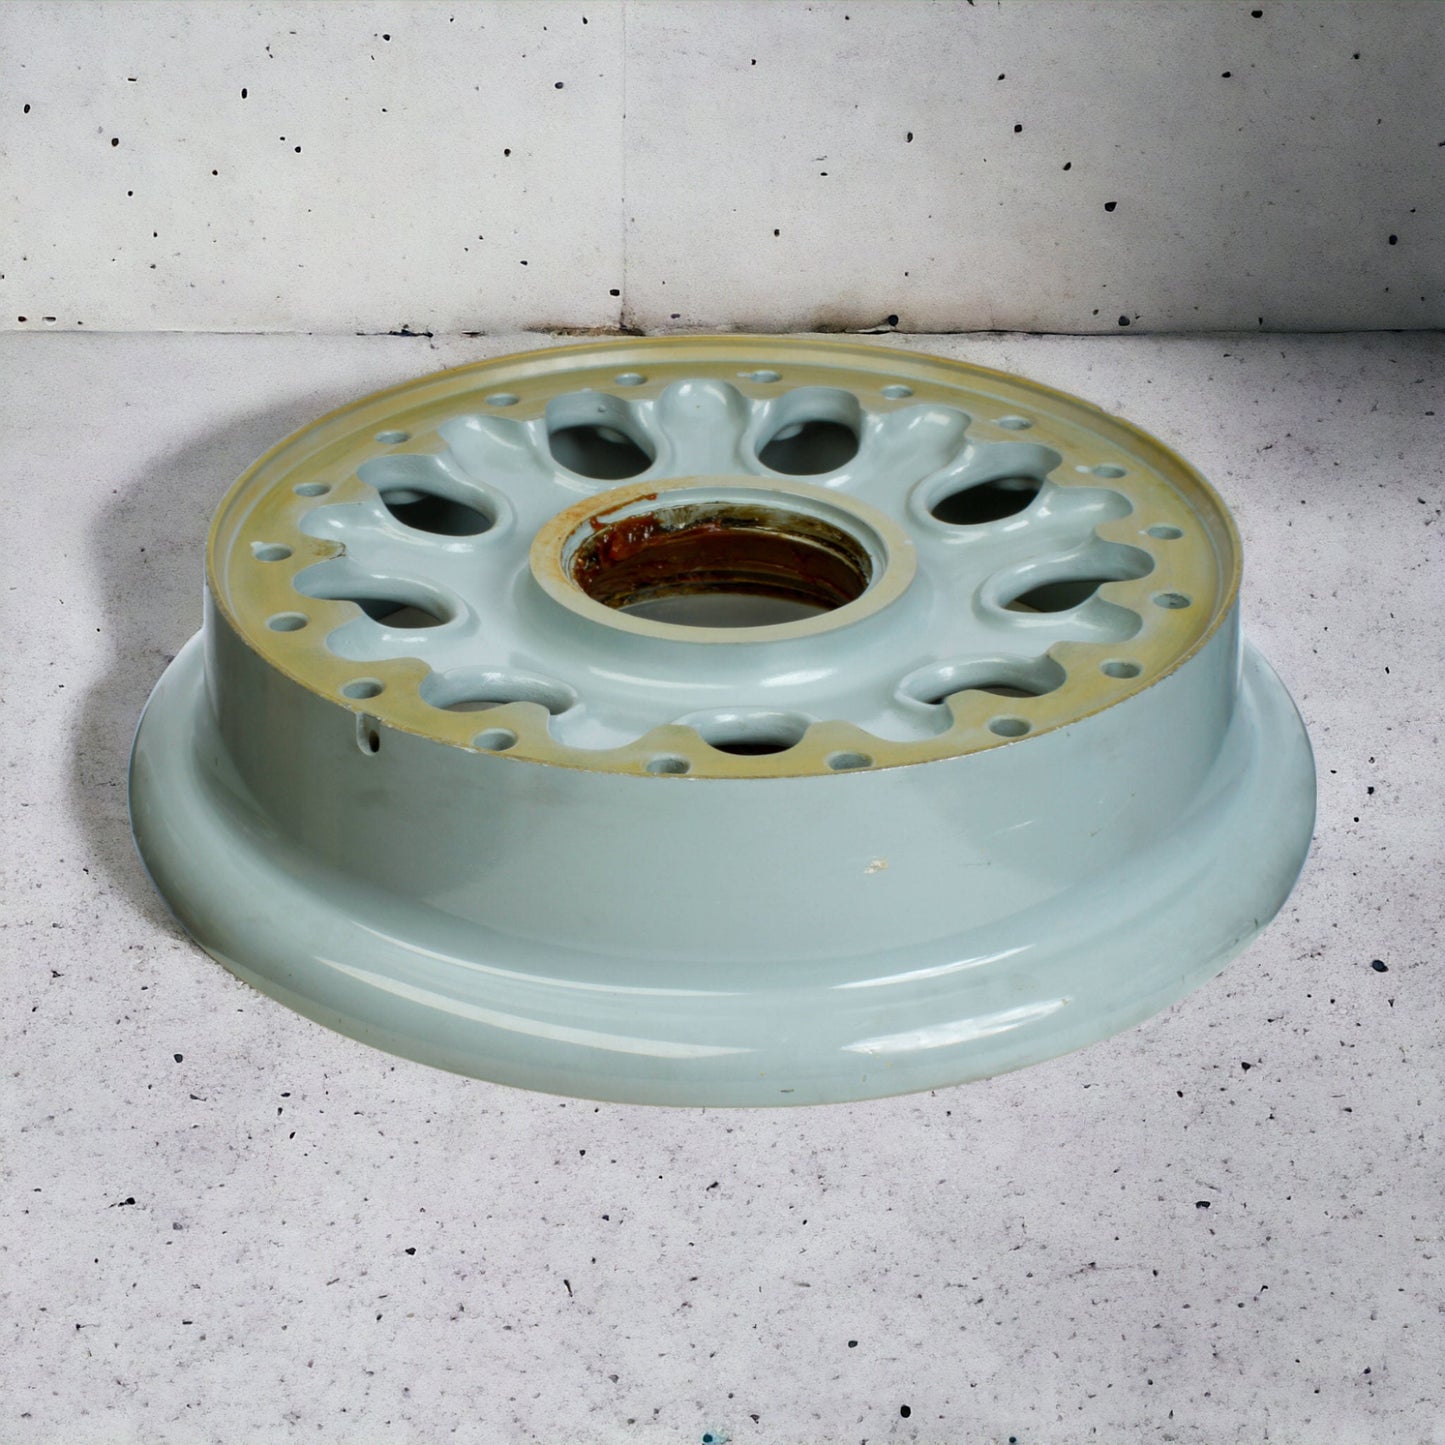 Boeing 737-300 Aircraft Main Wheel Ex EgyptAir Upcycled Table Coffee Table